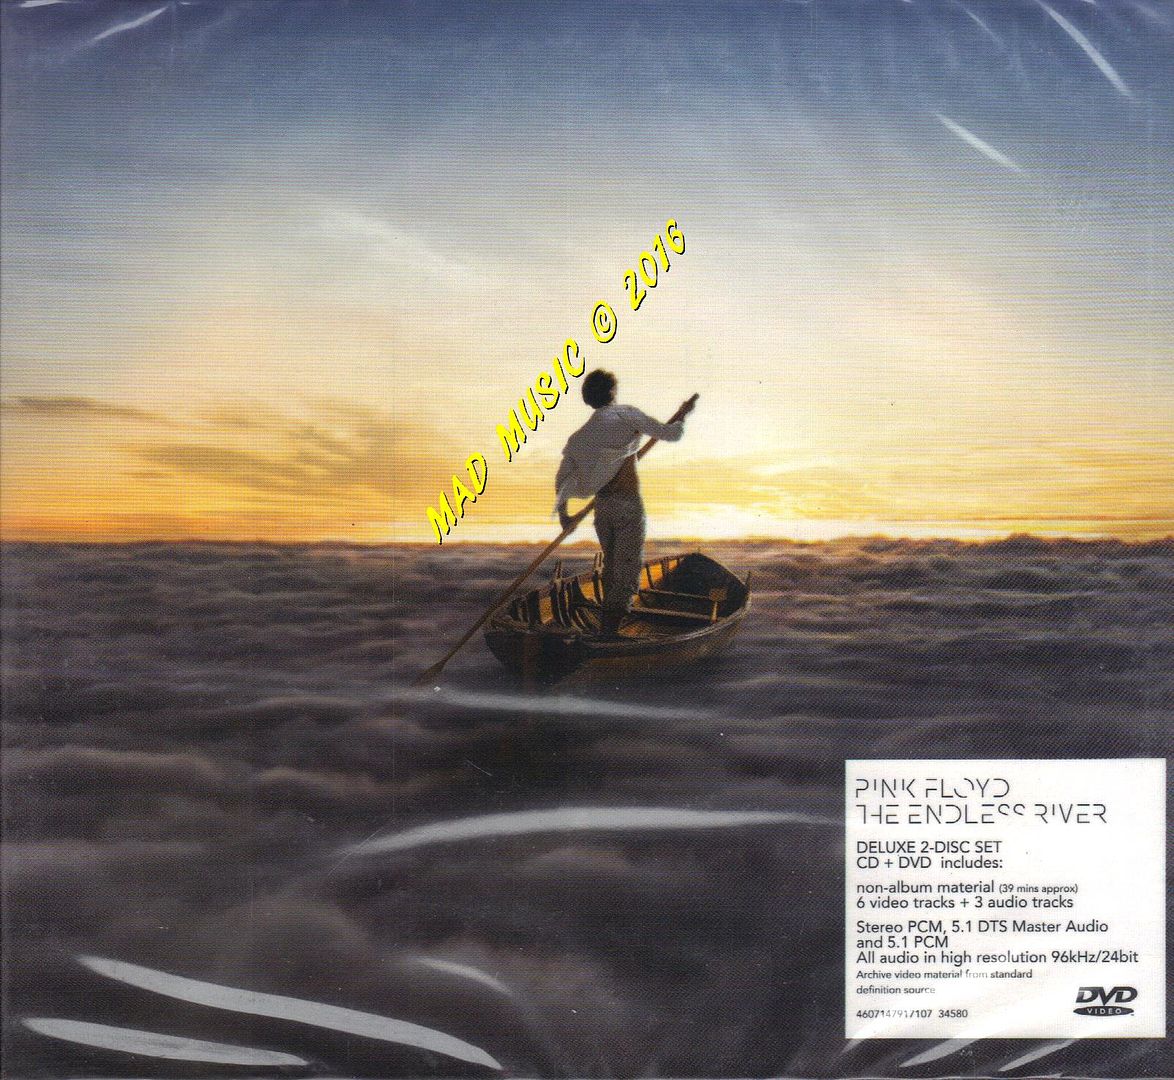 PINK FLOYD THE ENDLESS RIVER DOUBLE CD / DVD